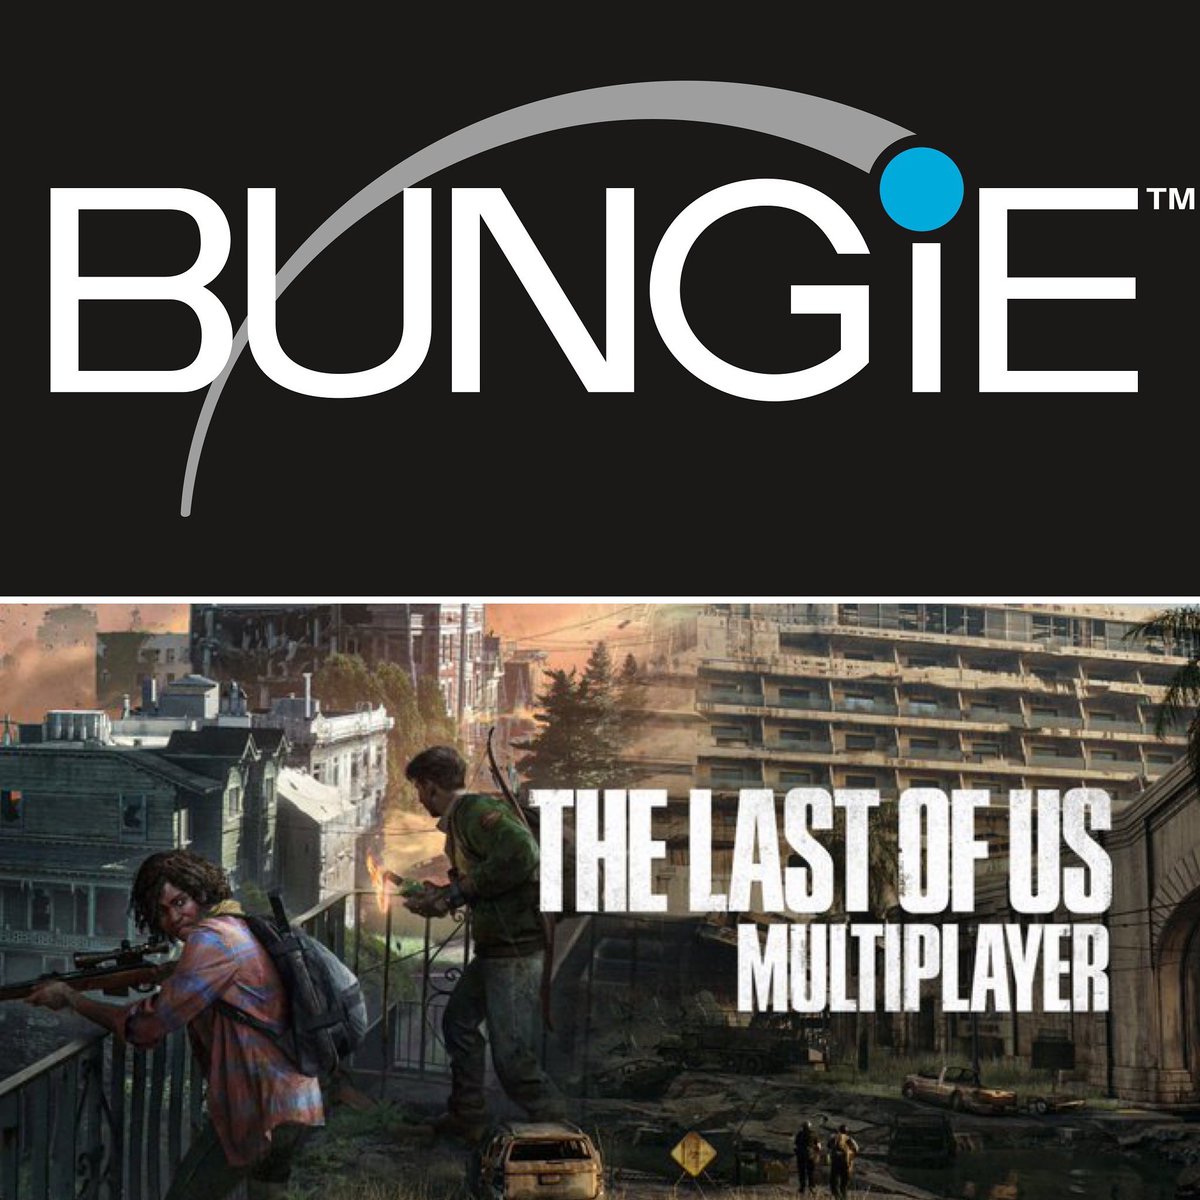 The Last of us Multiplayer Game is potentially on the brink of cancellation according to Jason Schreier from Bloomberg.

Bungie reportedly analysed The Last of us Multiplayer at the request of Playstation and expressed doubts about the game's ability to keep players engaged.